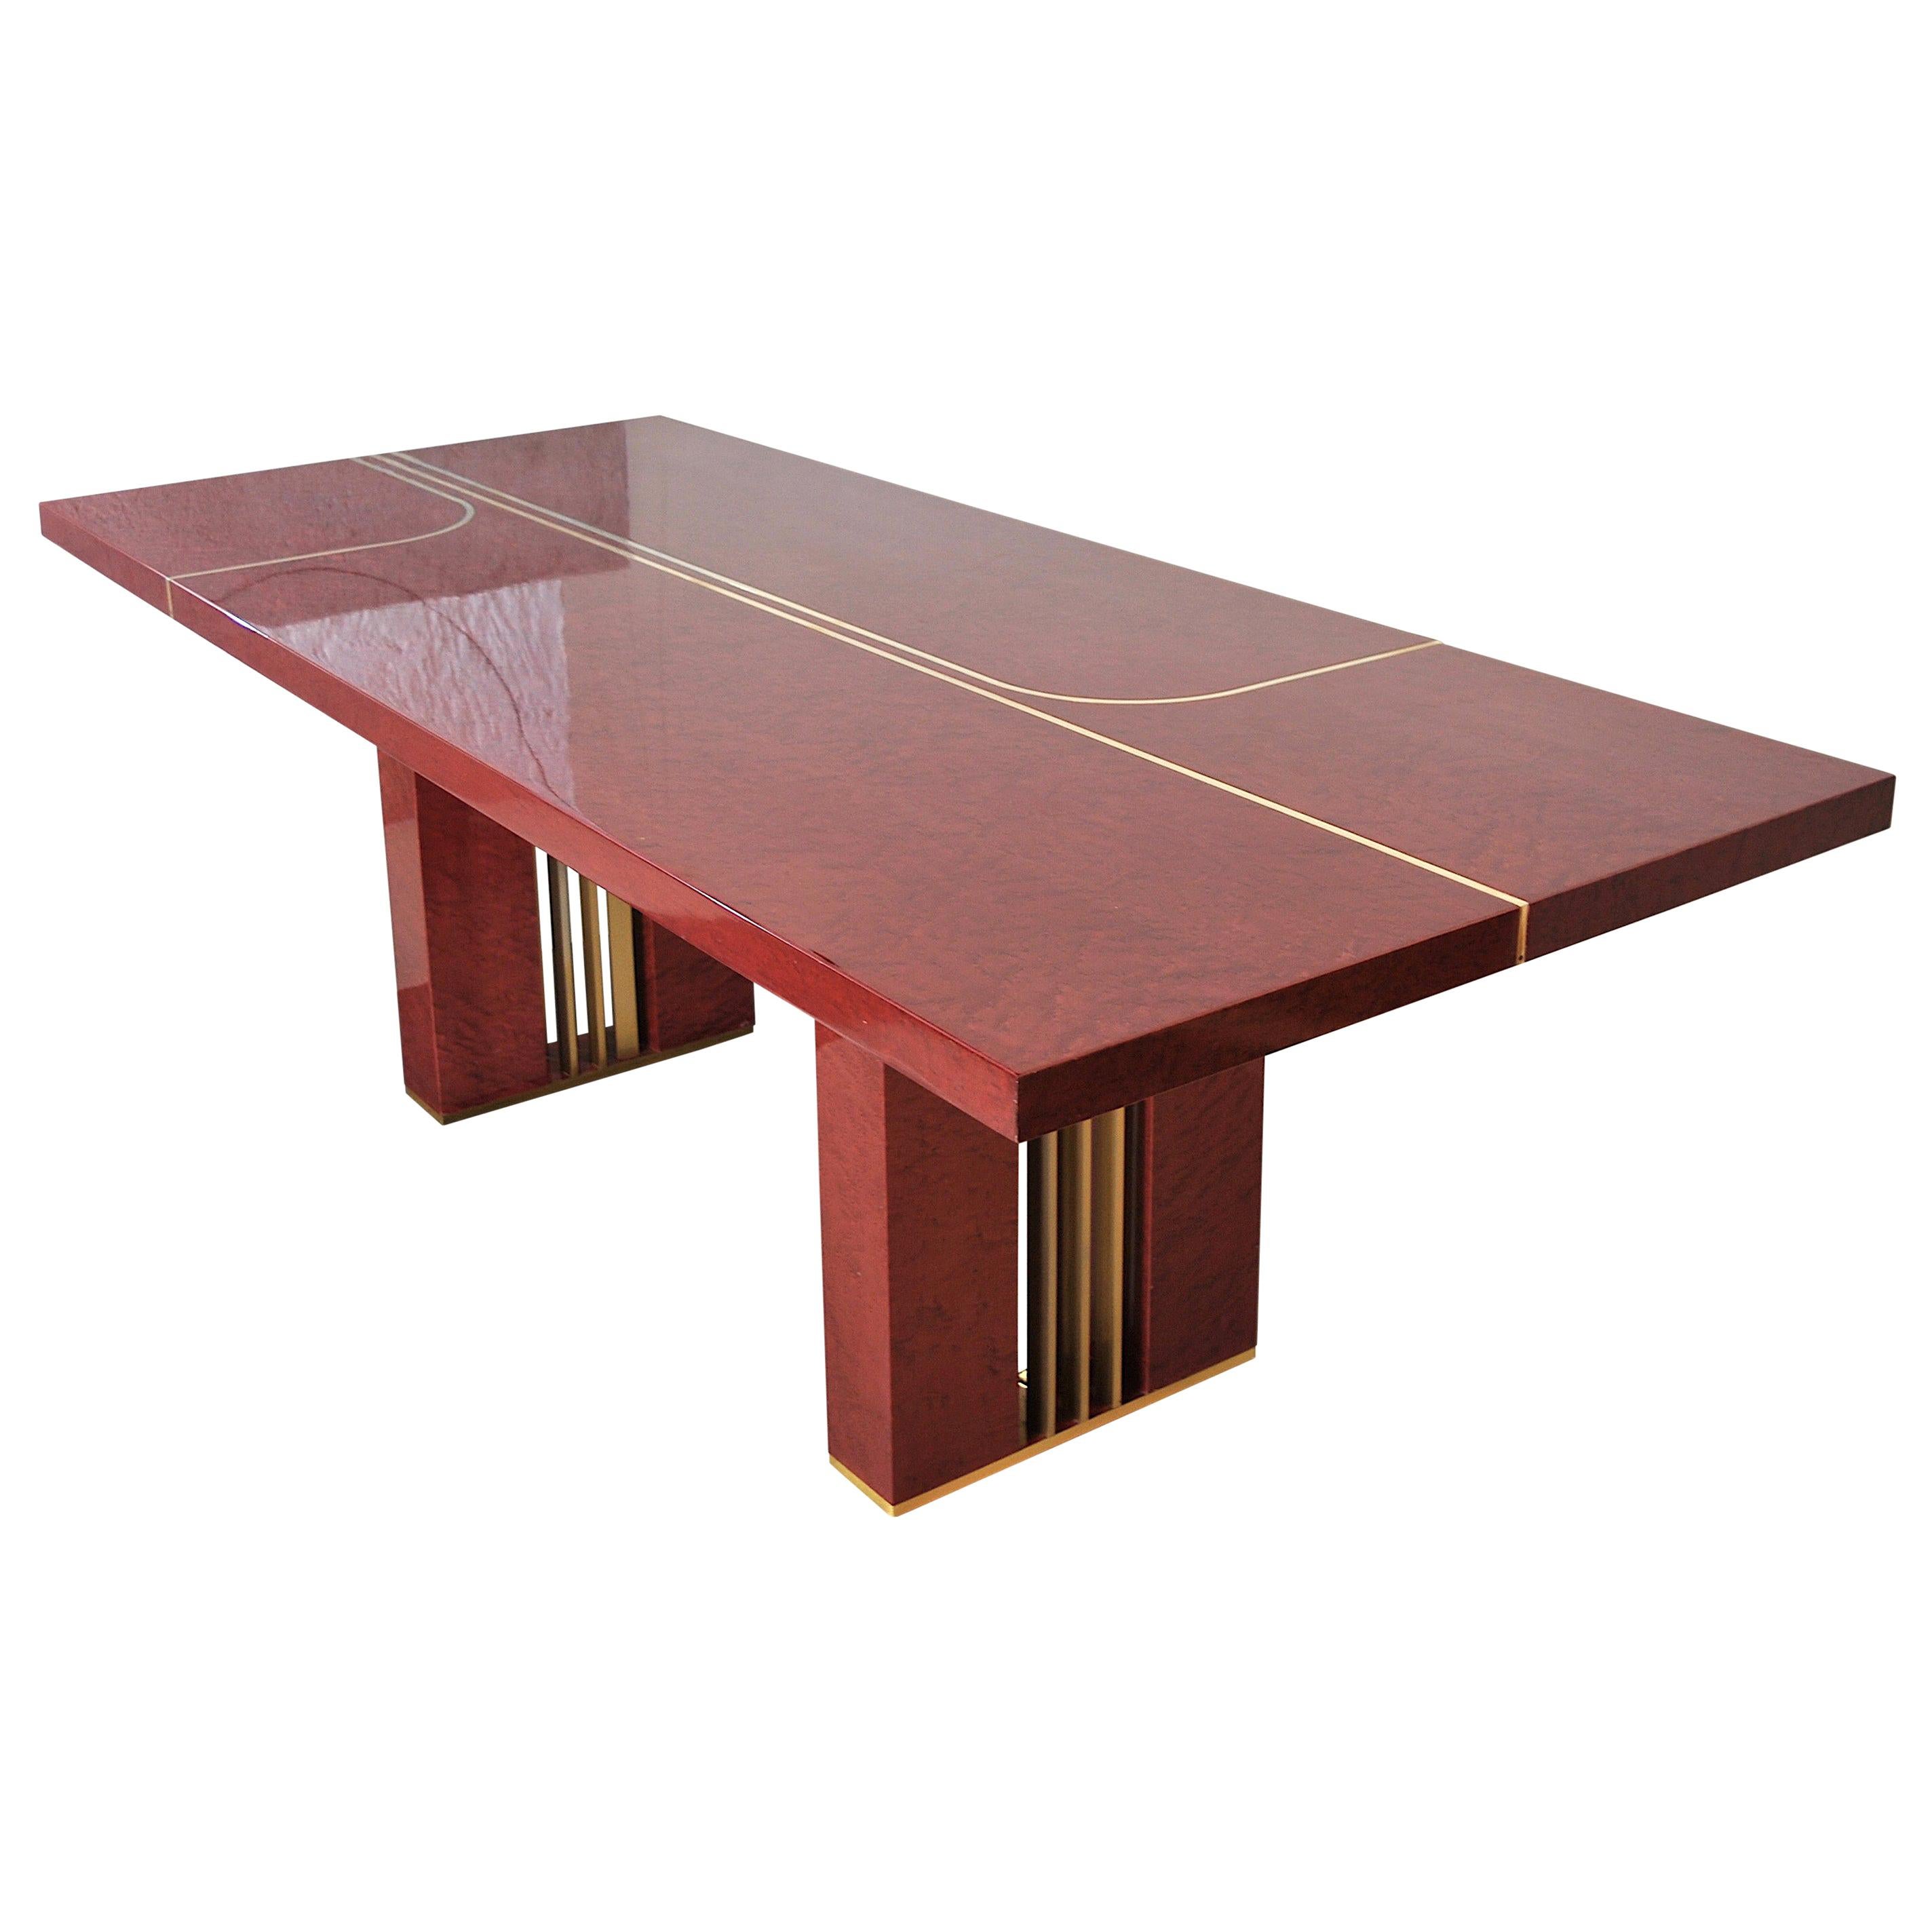 Romeo Rega Italian Midcentury Red Lacquered Wood and Brass French Table, 1980s